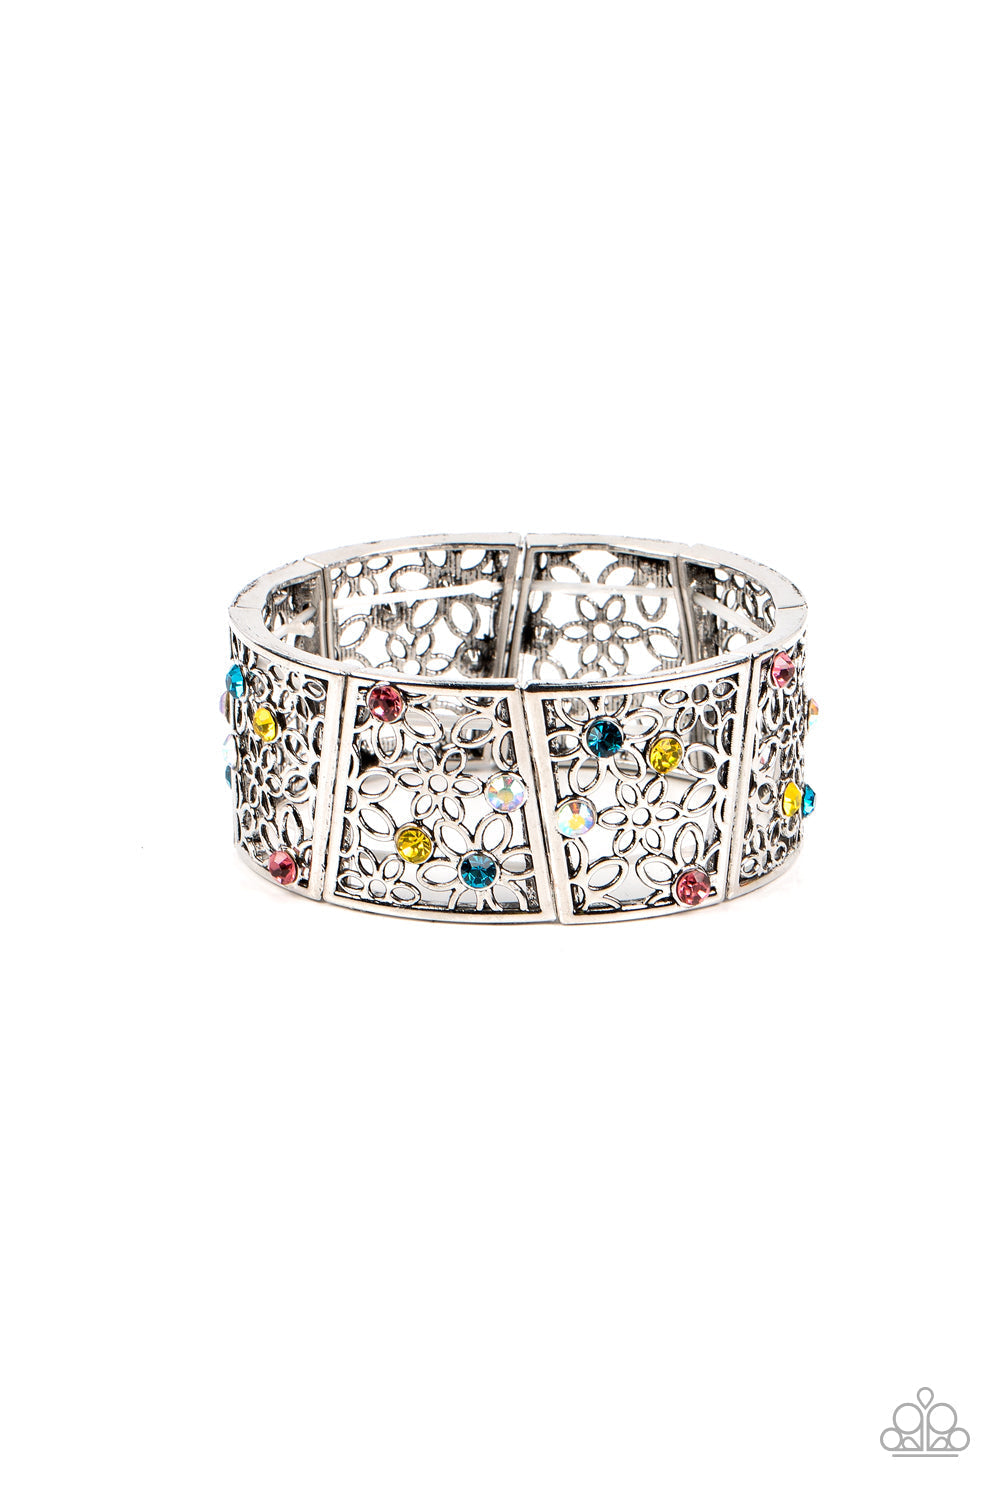 Spring Greetings - Multi Color and Silver Stretchy Bracelet - Paparazzi Accessories - Multicolored and iridescent rhinestones, an airy daisy pattern blooms inside silver frames that are threaded along stretchy bands around the wrist.